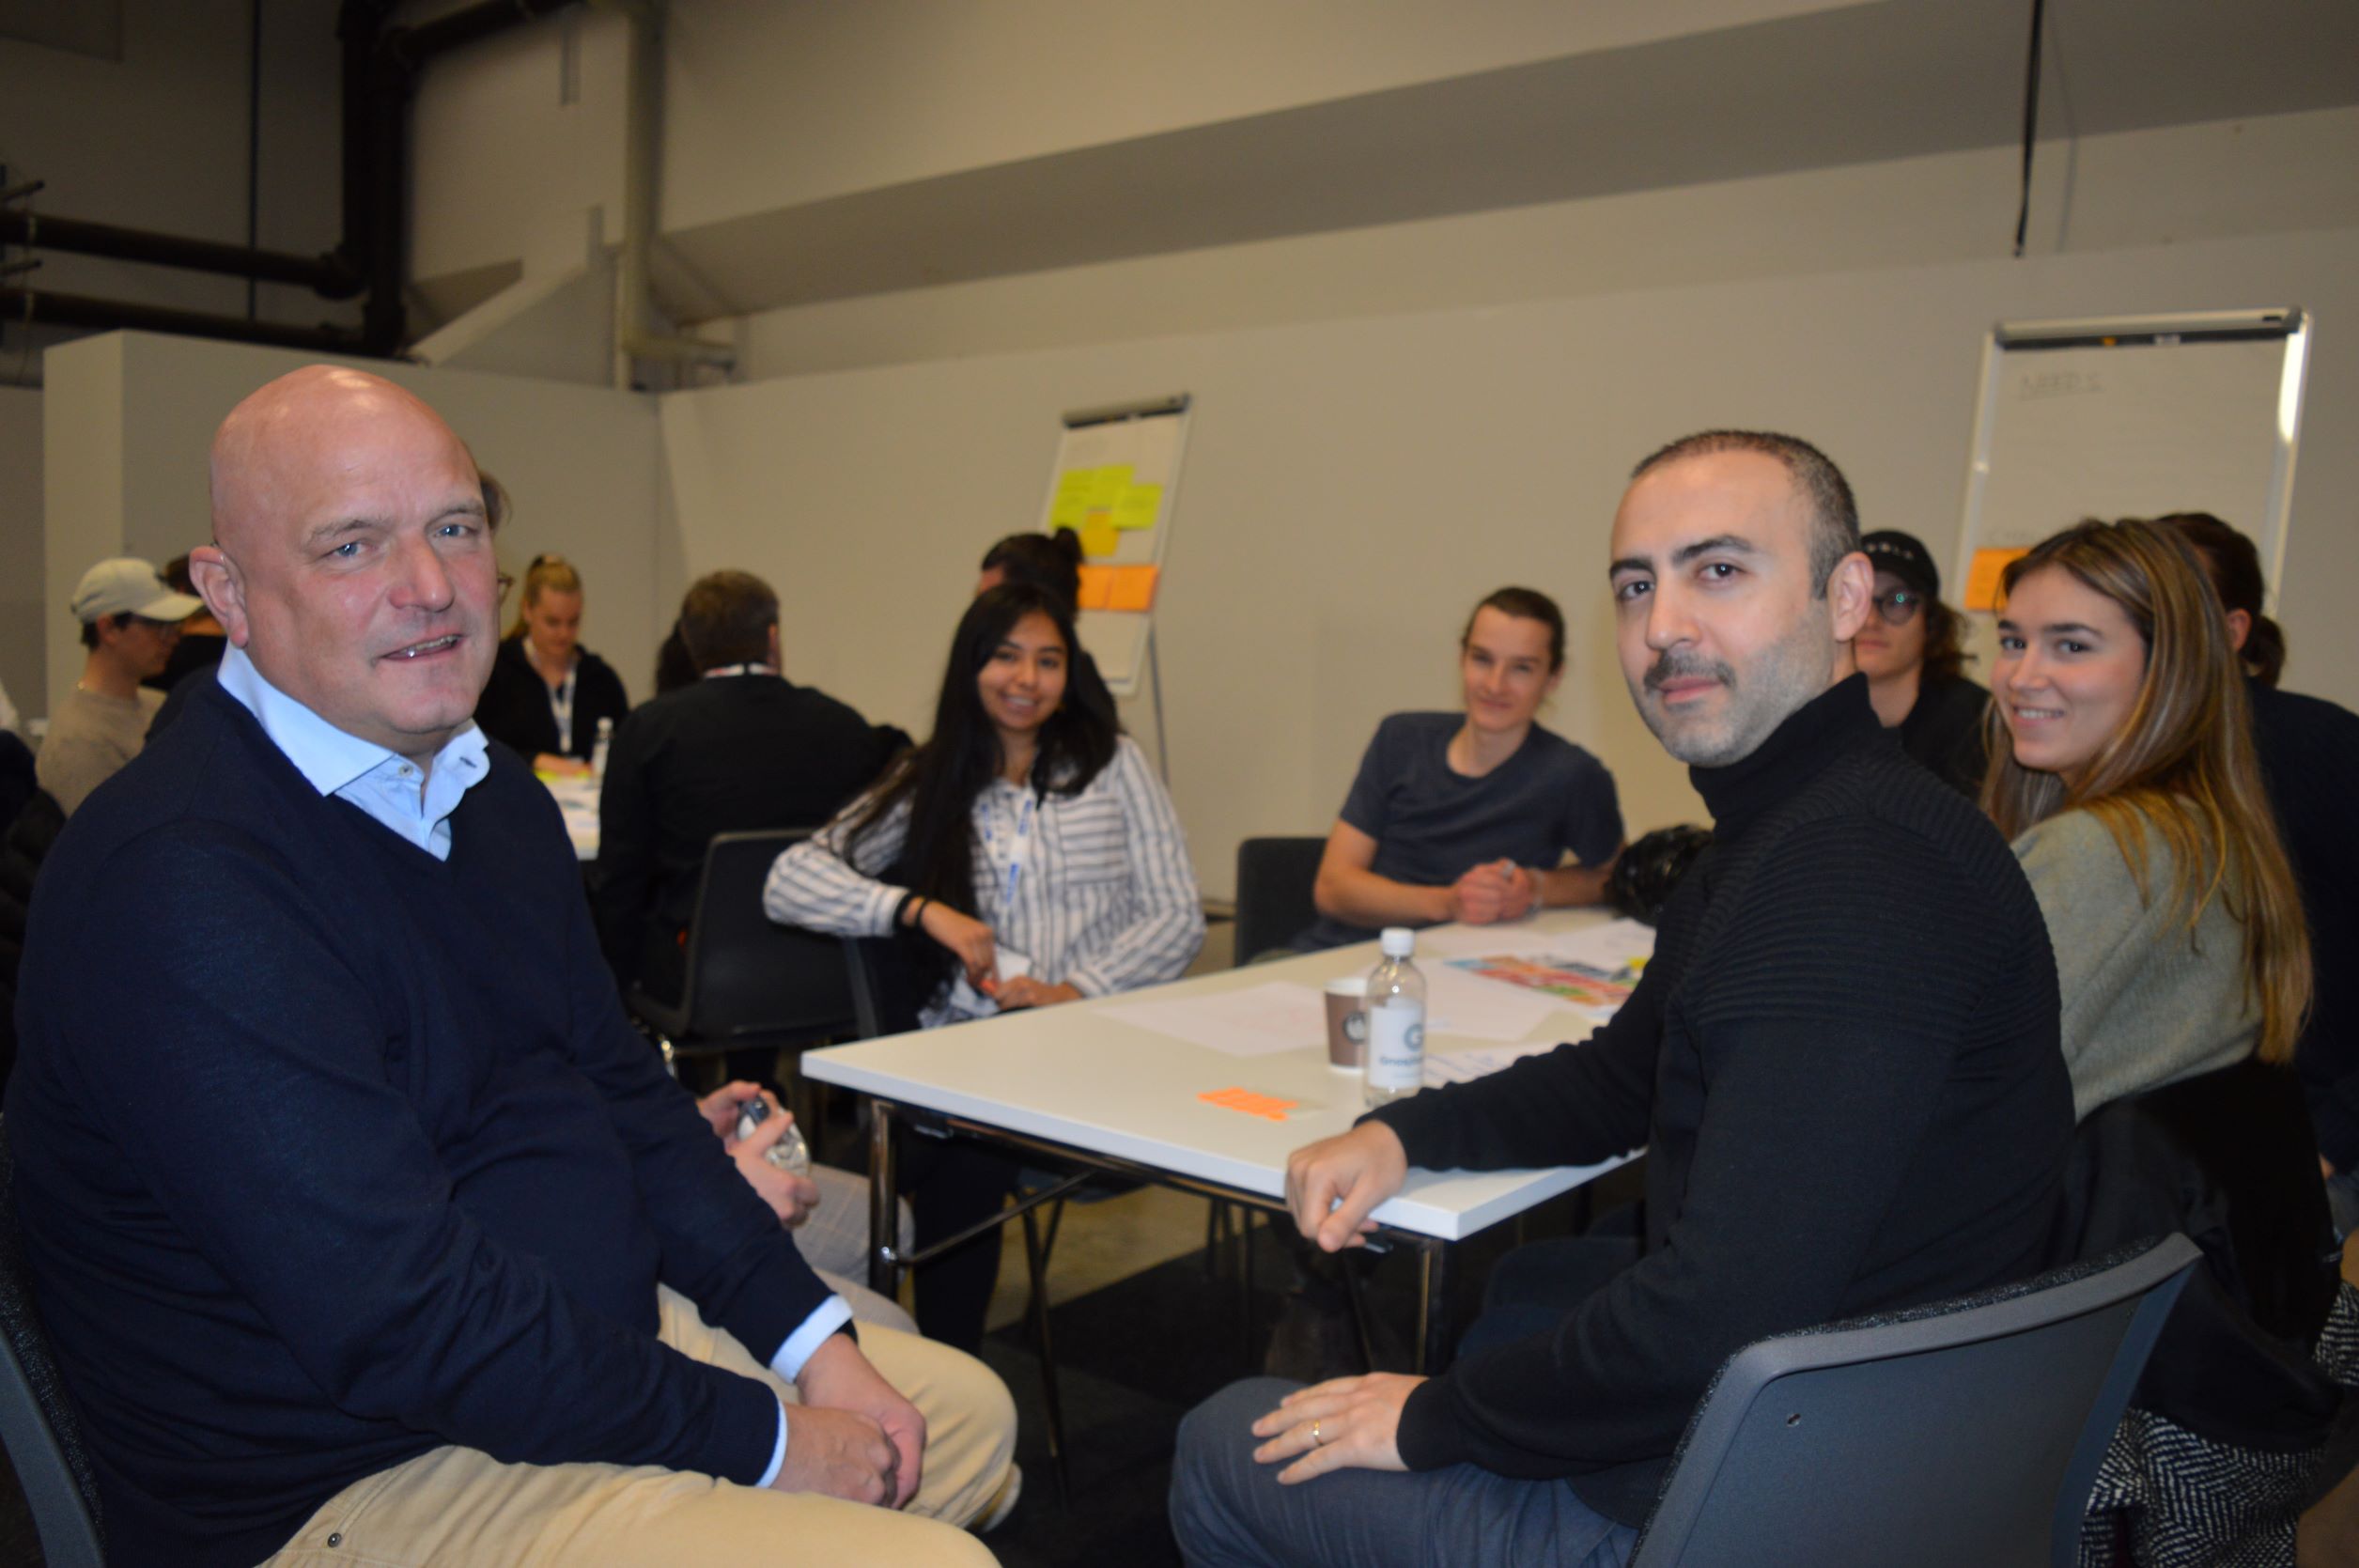 Lars Eriksson, Professor Industrial Design at JTH and Moe Soheilian, Lecturer at JTH, during the workshop with, among others, JTH students at Elmia Subcontractor.